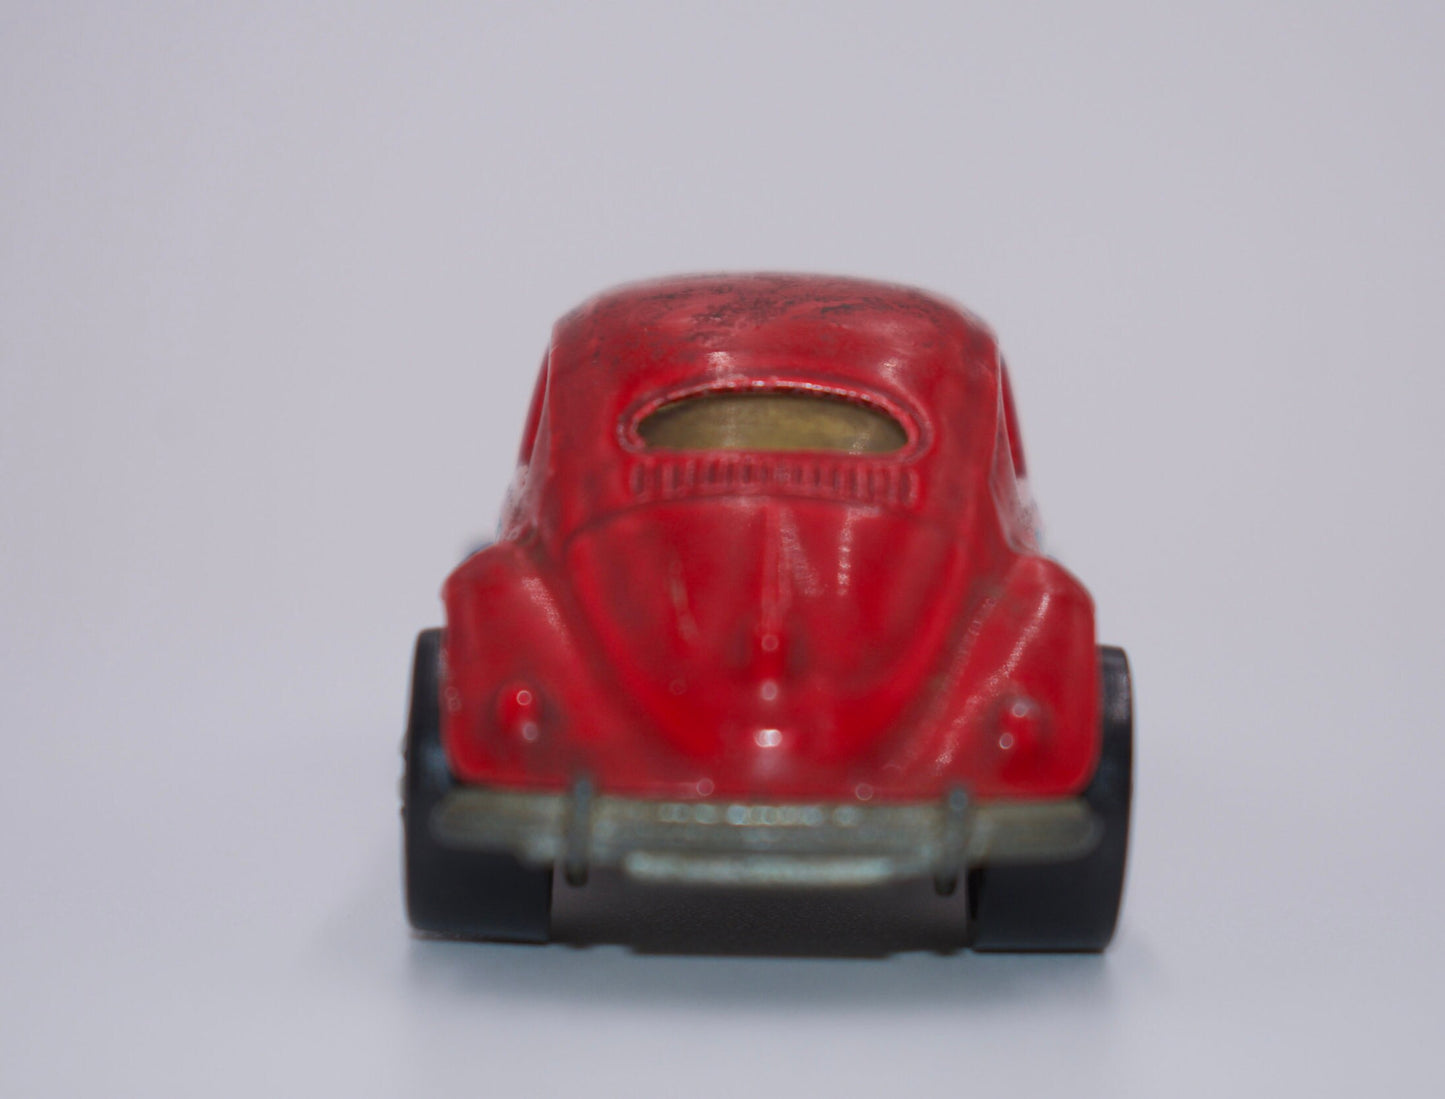 Hot Wheels VW Bug Enamel Cherry Red Blue Card Perfect Birthday Gift Miniature Collectable Scale Model Toy Car